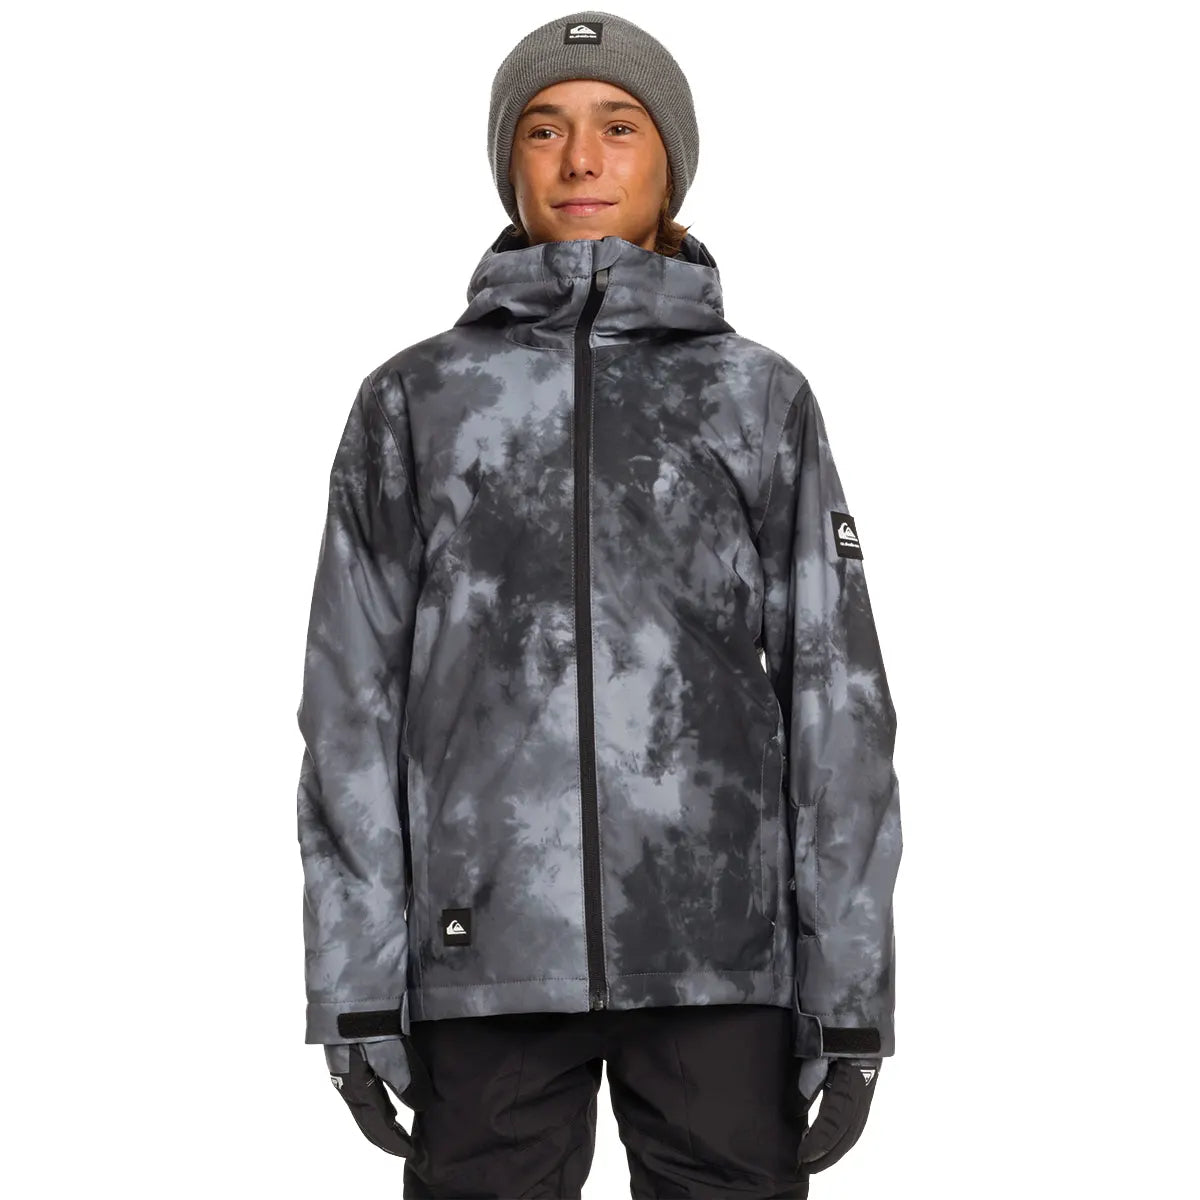 Quiksilver Mission Printed Youth Jacket - True Black Quiet Storm